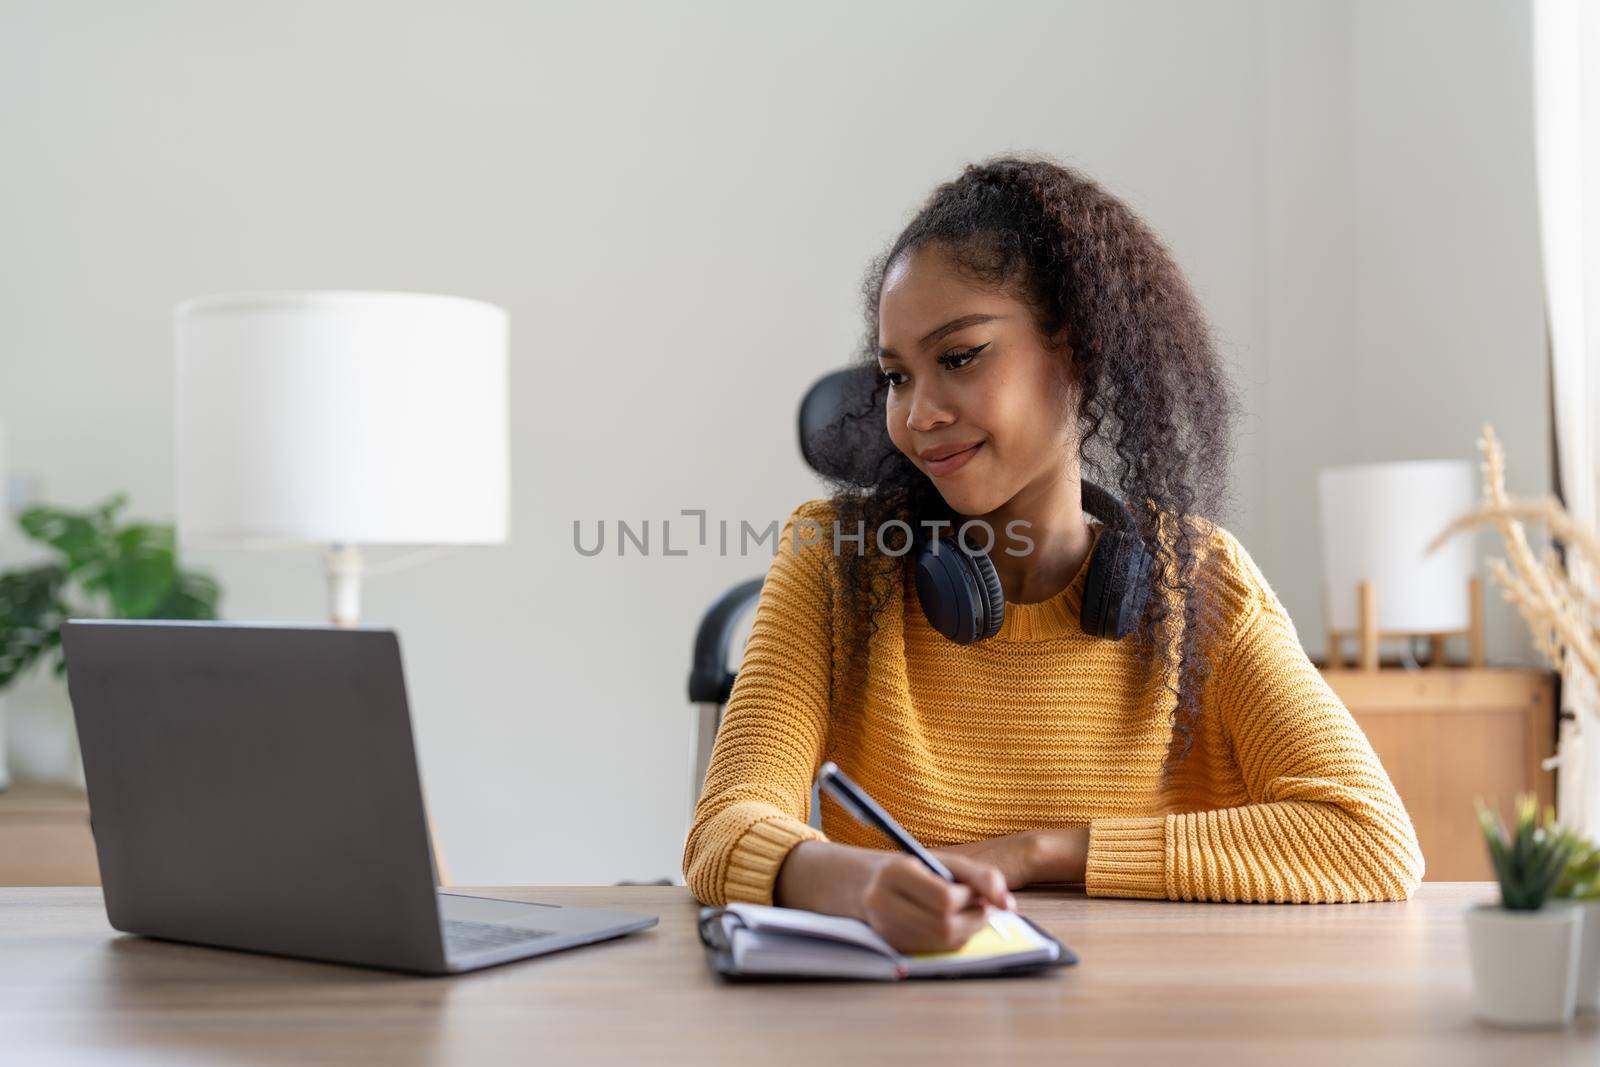 Young woman using laptop computer at office. Student girl working at home. Work or study from home, freelance, business, lifestyle concept.